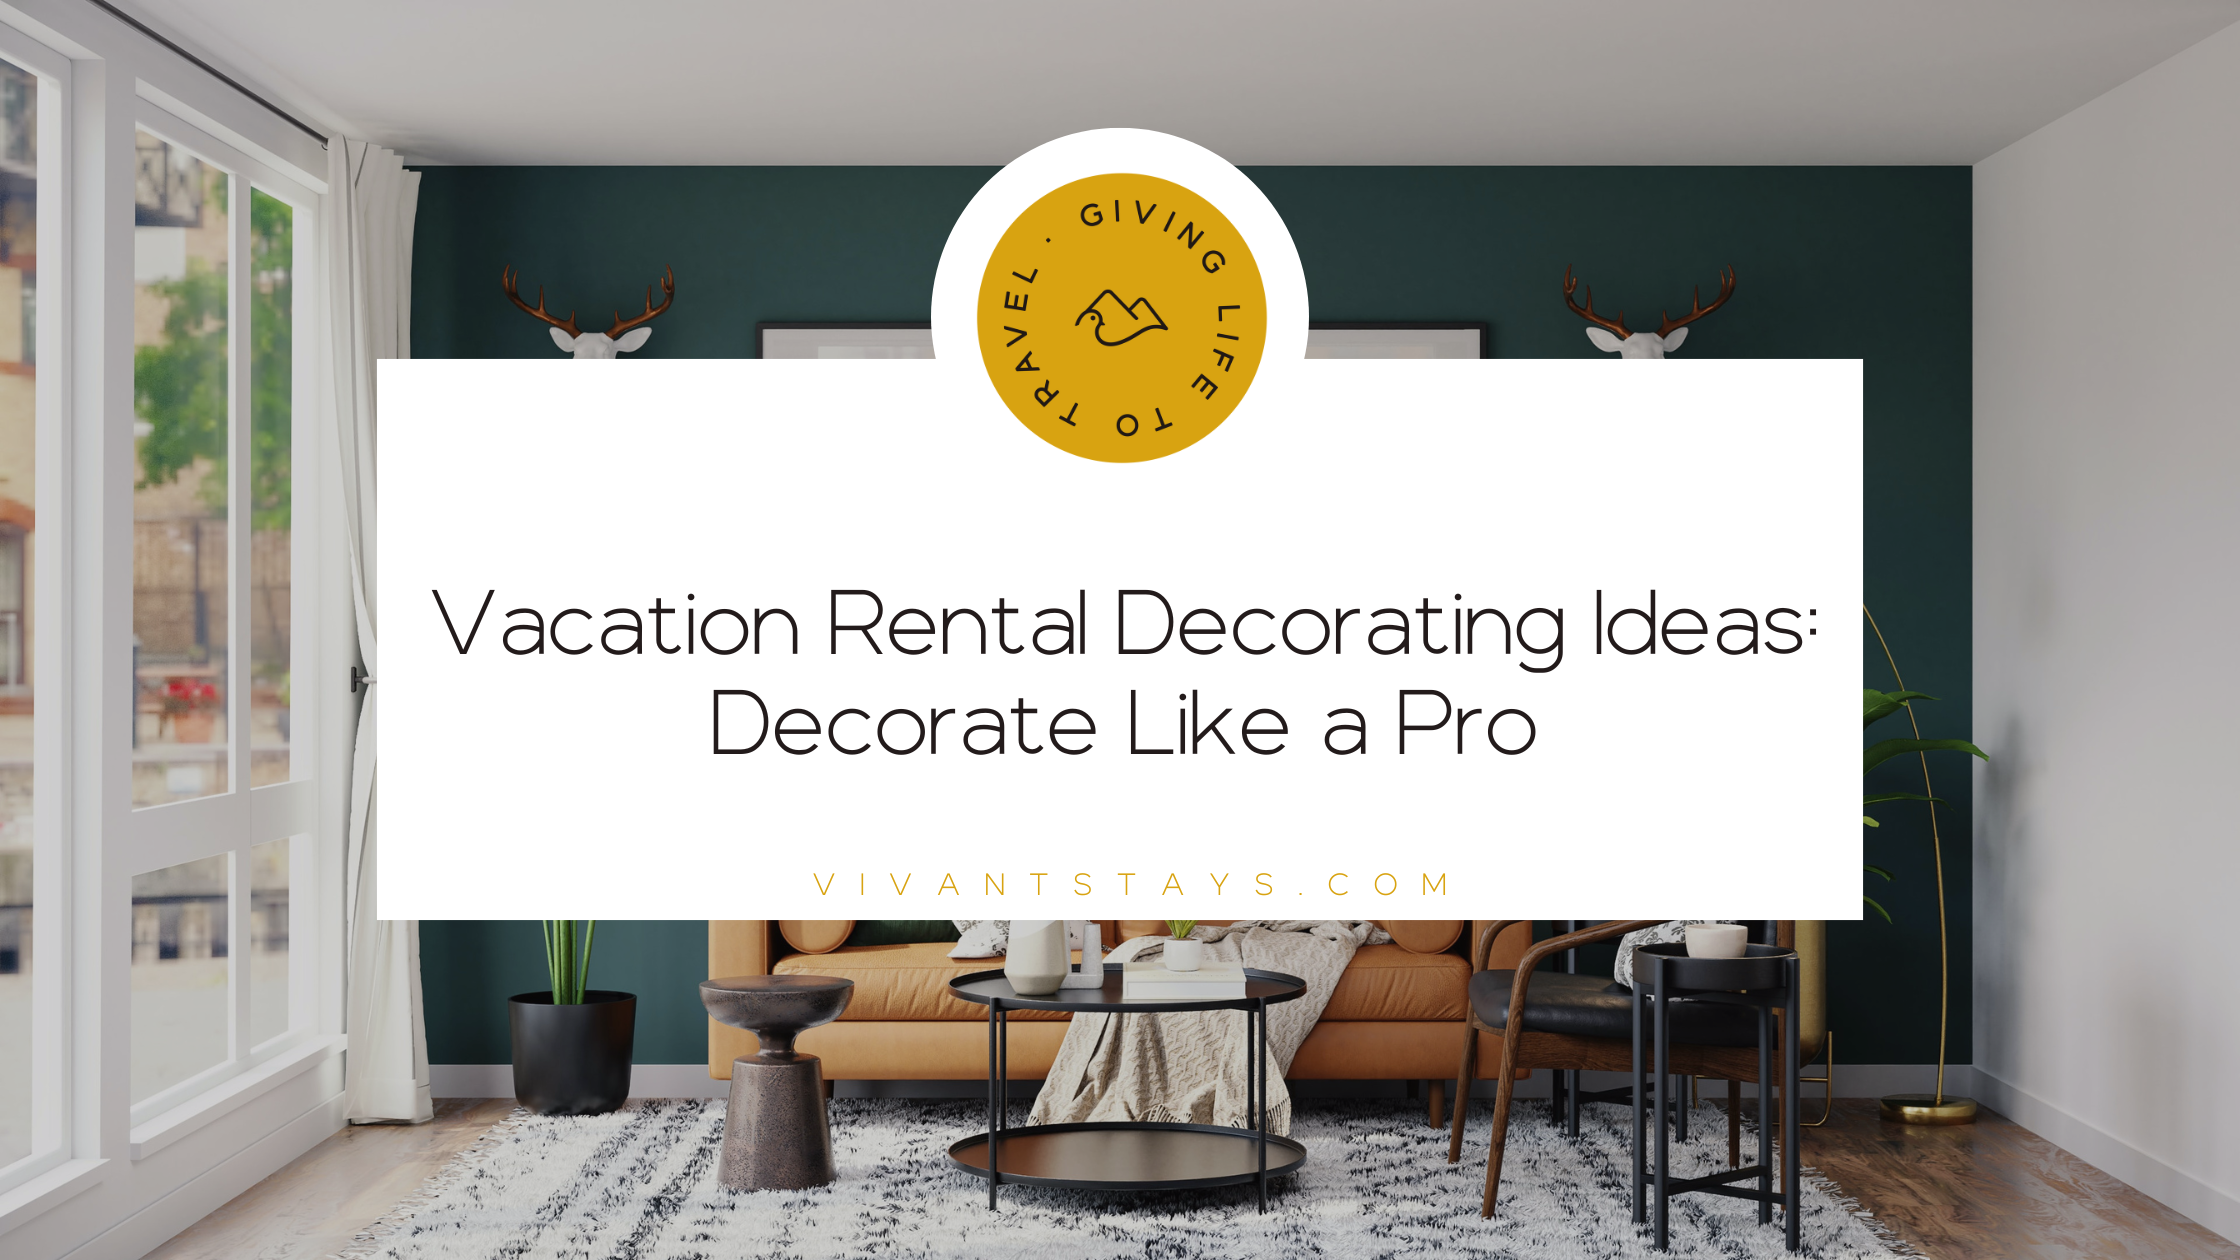 Vivant's blog banner titled "Vacation Rental Decorating Ideas: Decorate Like a Pro"